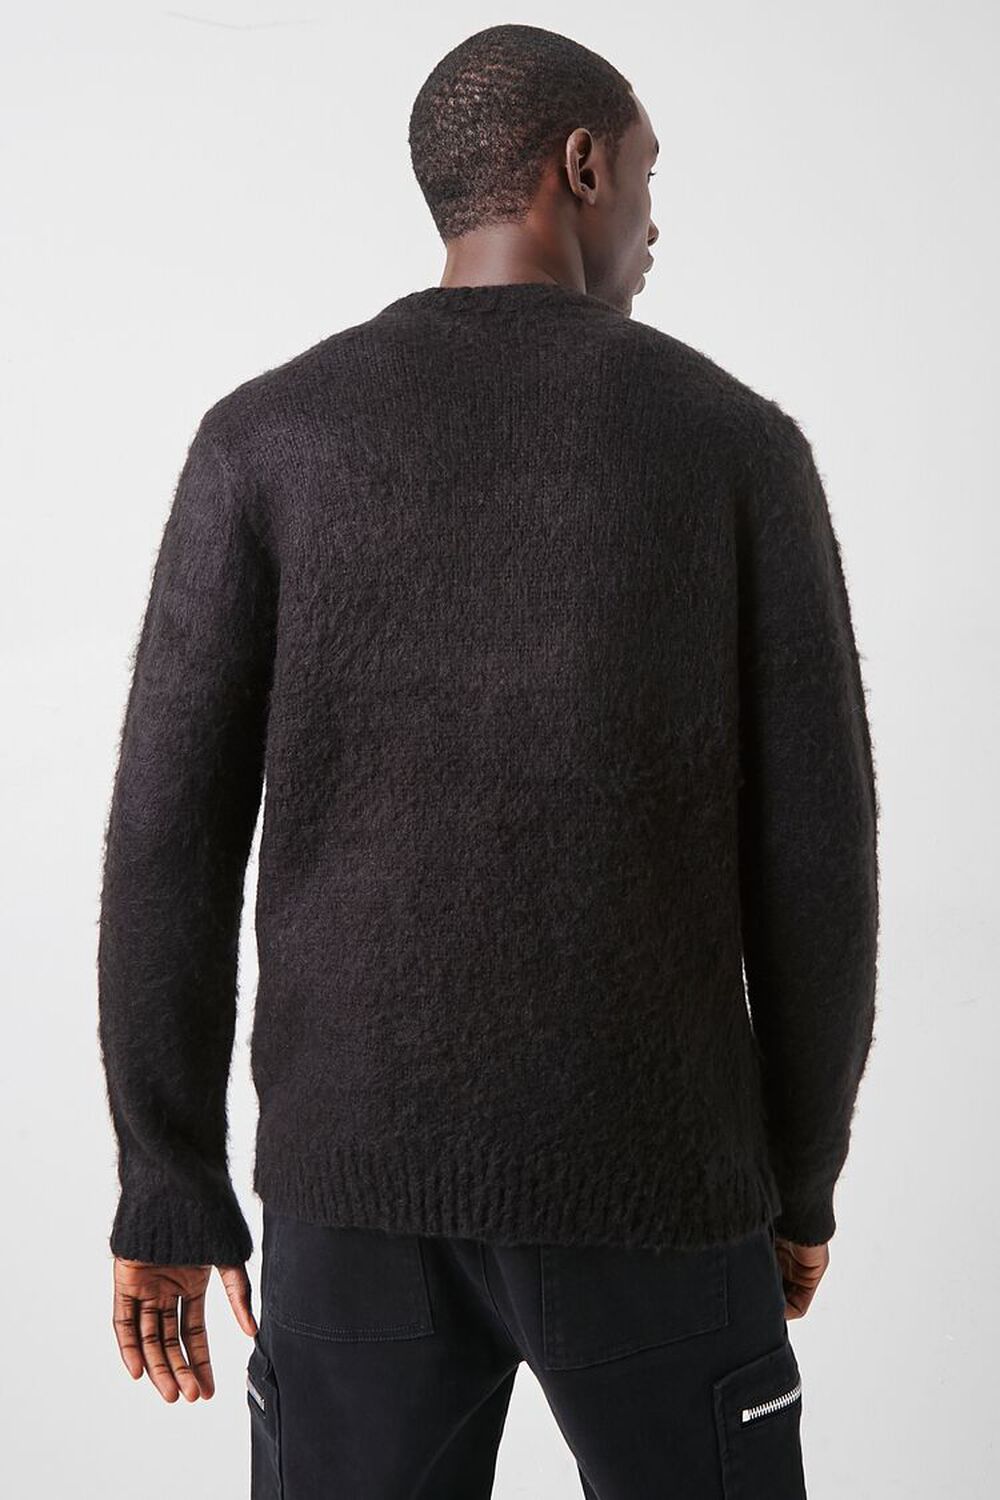 BLACK Brushed Purl Knit Sweater, image 3